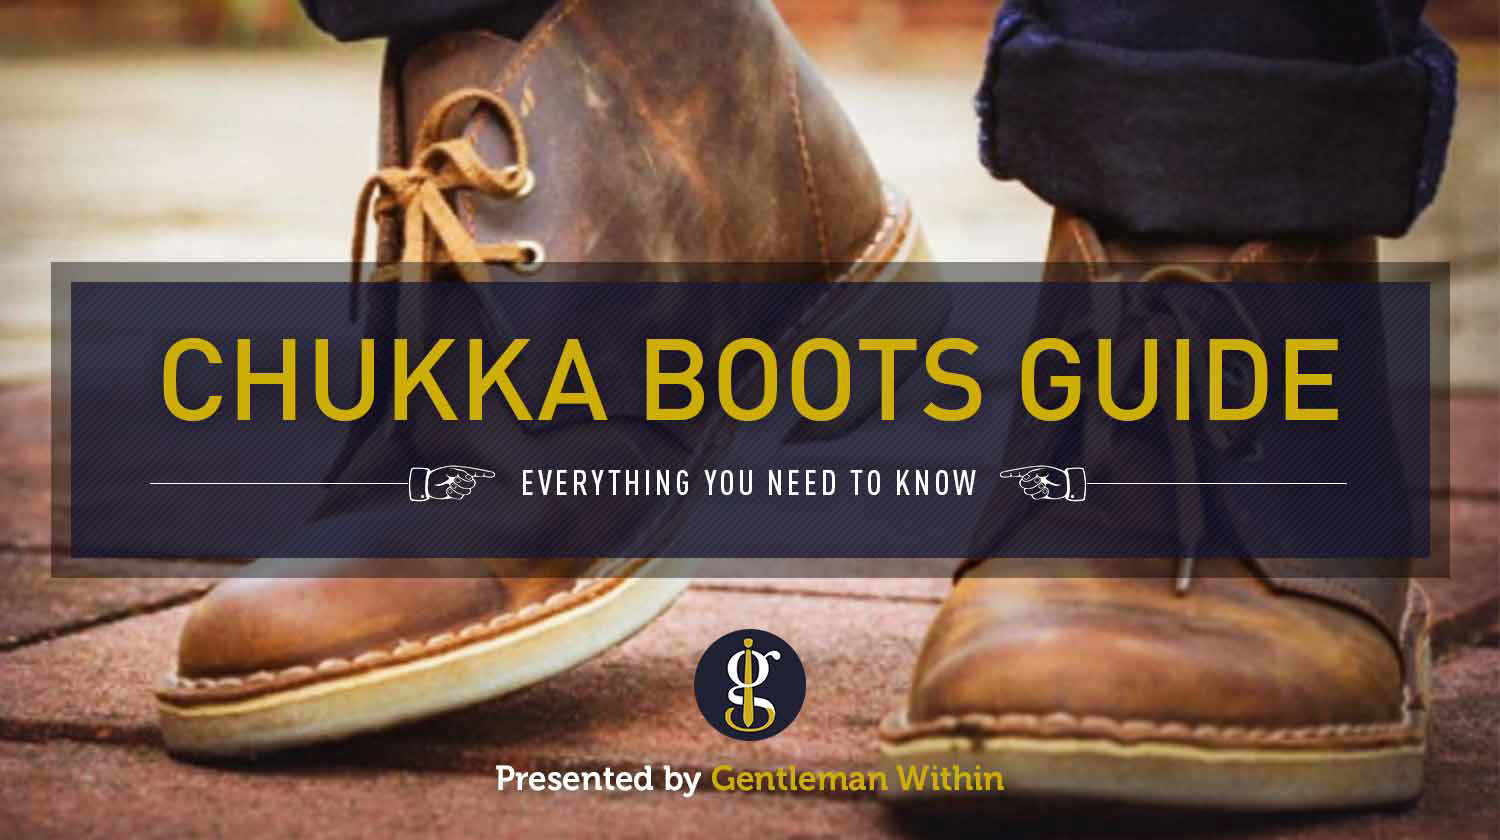 Best Chukka Boots: Complete Guide (Everything You Need to Know)